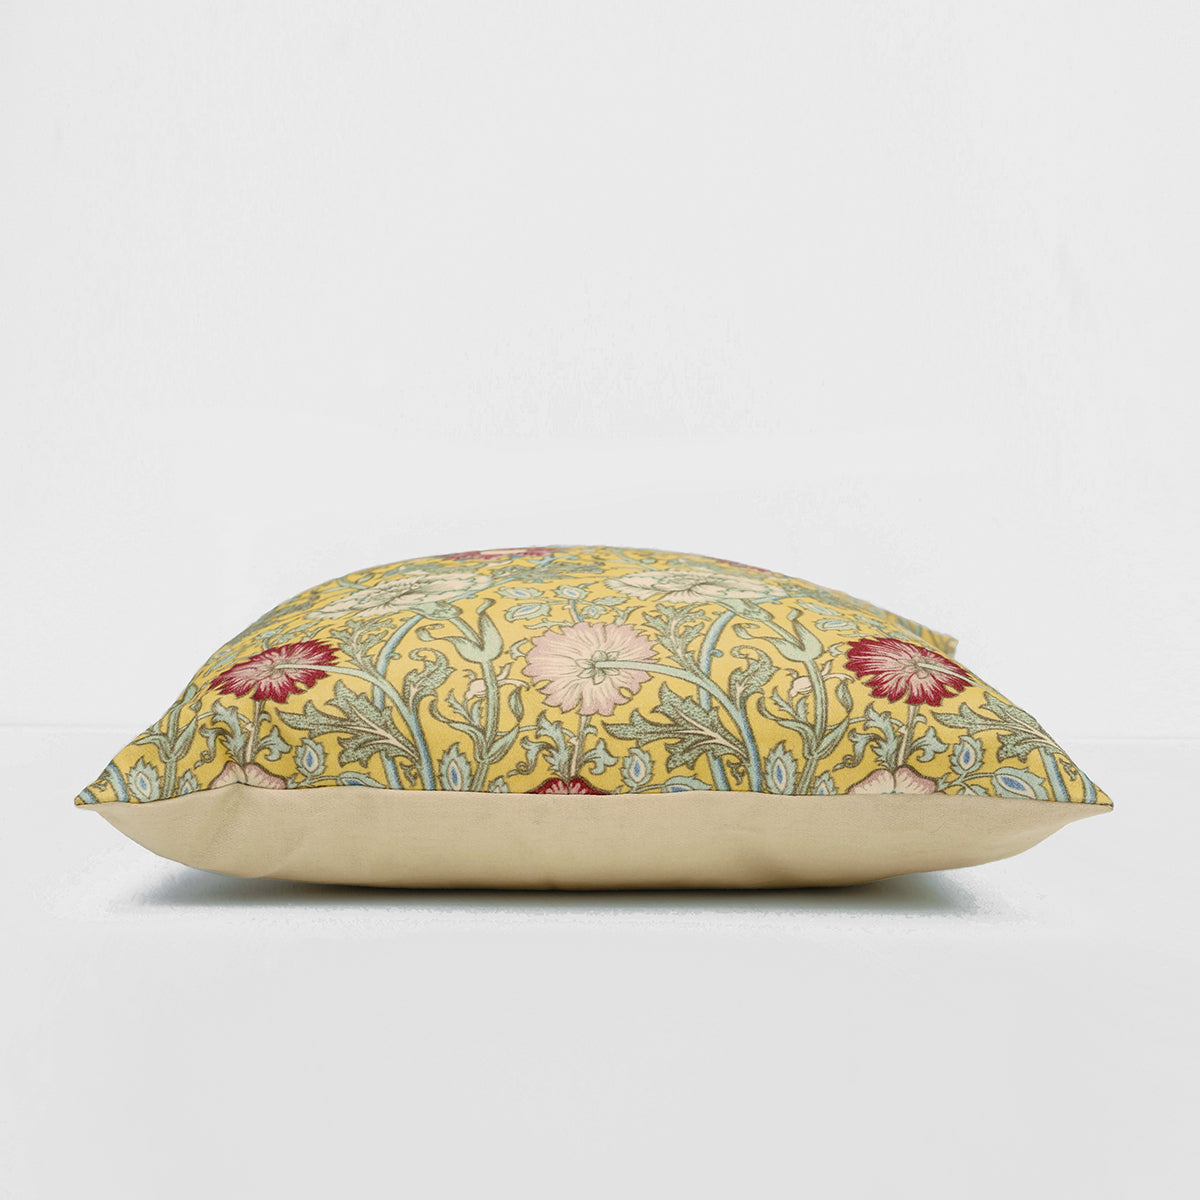 William Morris pillow cover, Yellow Floral pattern, sizes available